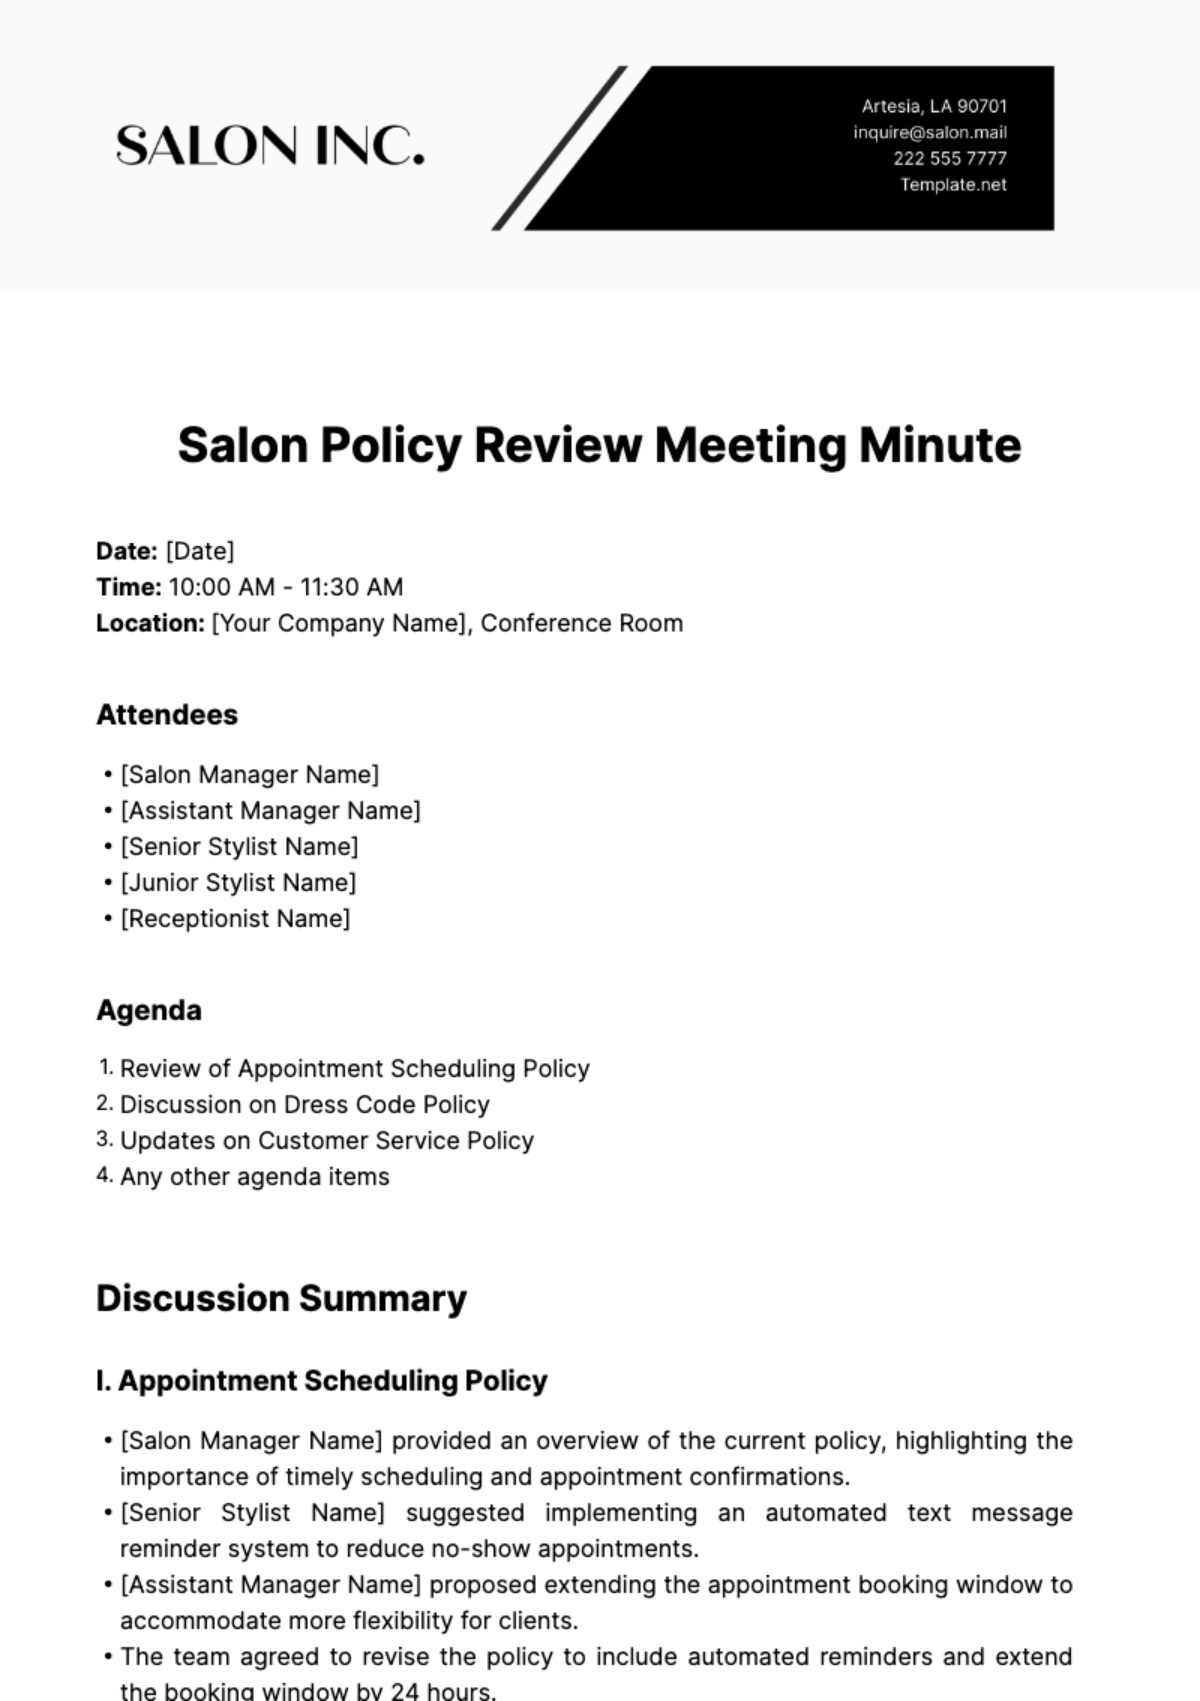 Free Salon Policy Review Meeting Minute Template